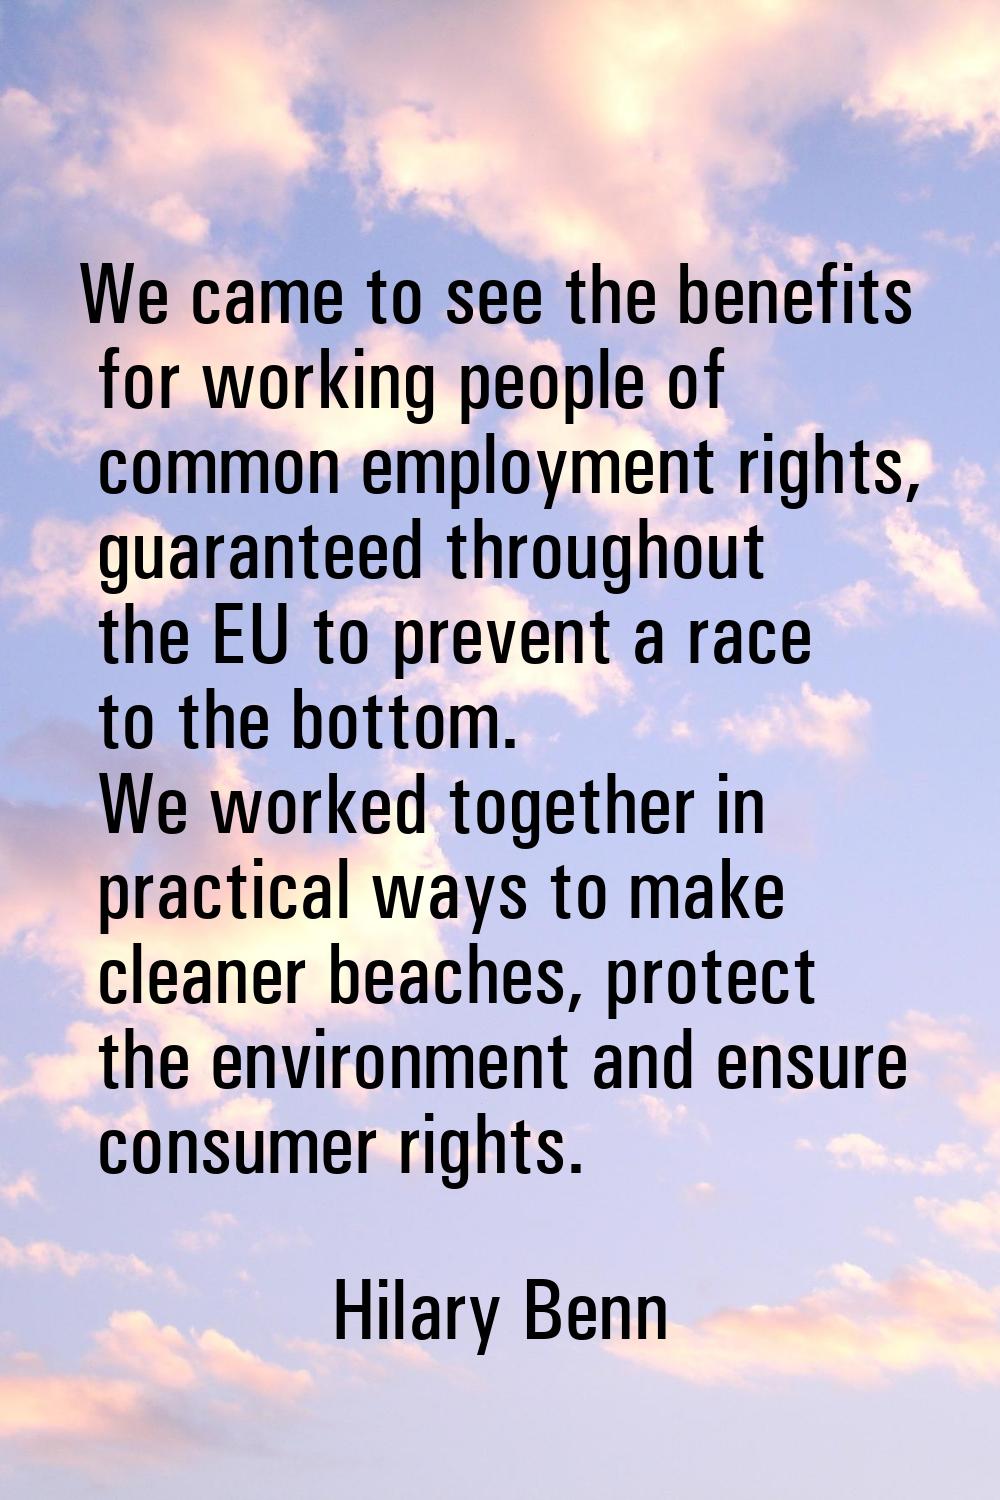 We came to see the benefits for working people of common employment rights, guaranteed throughout t